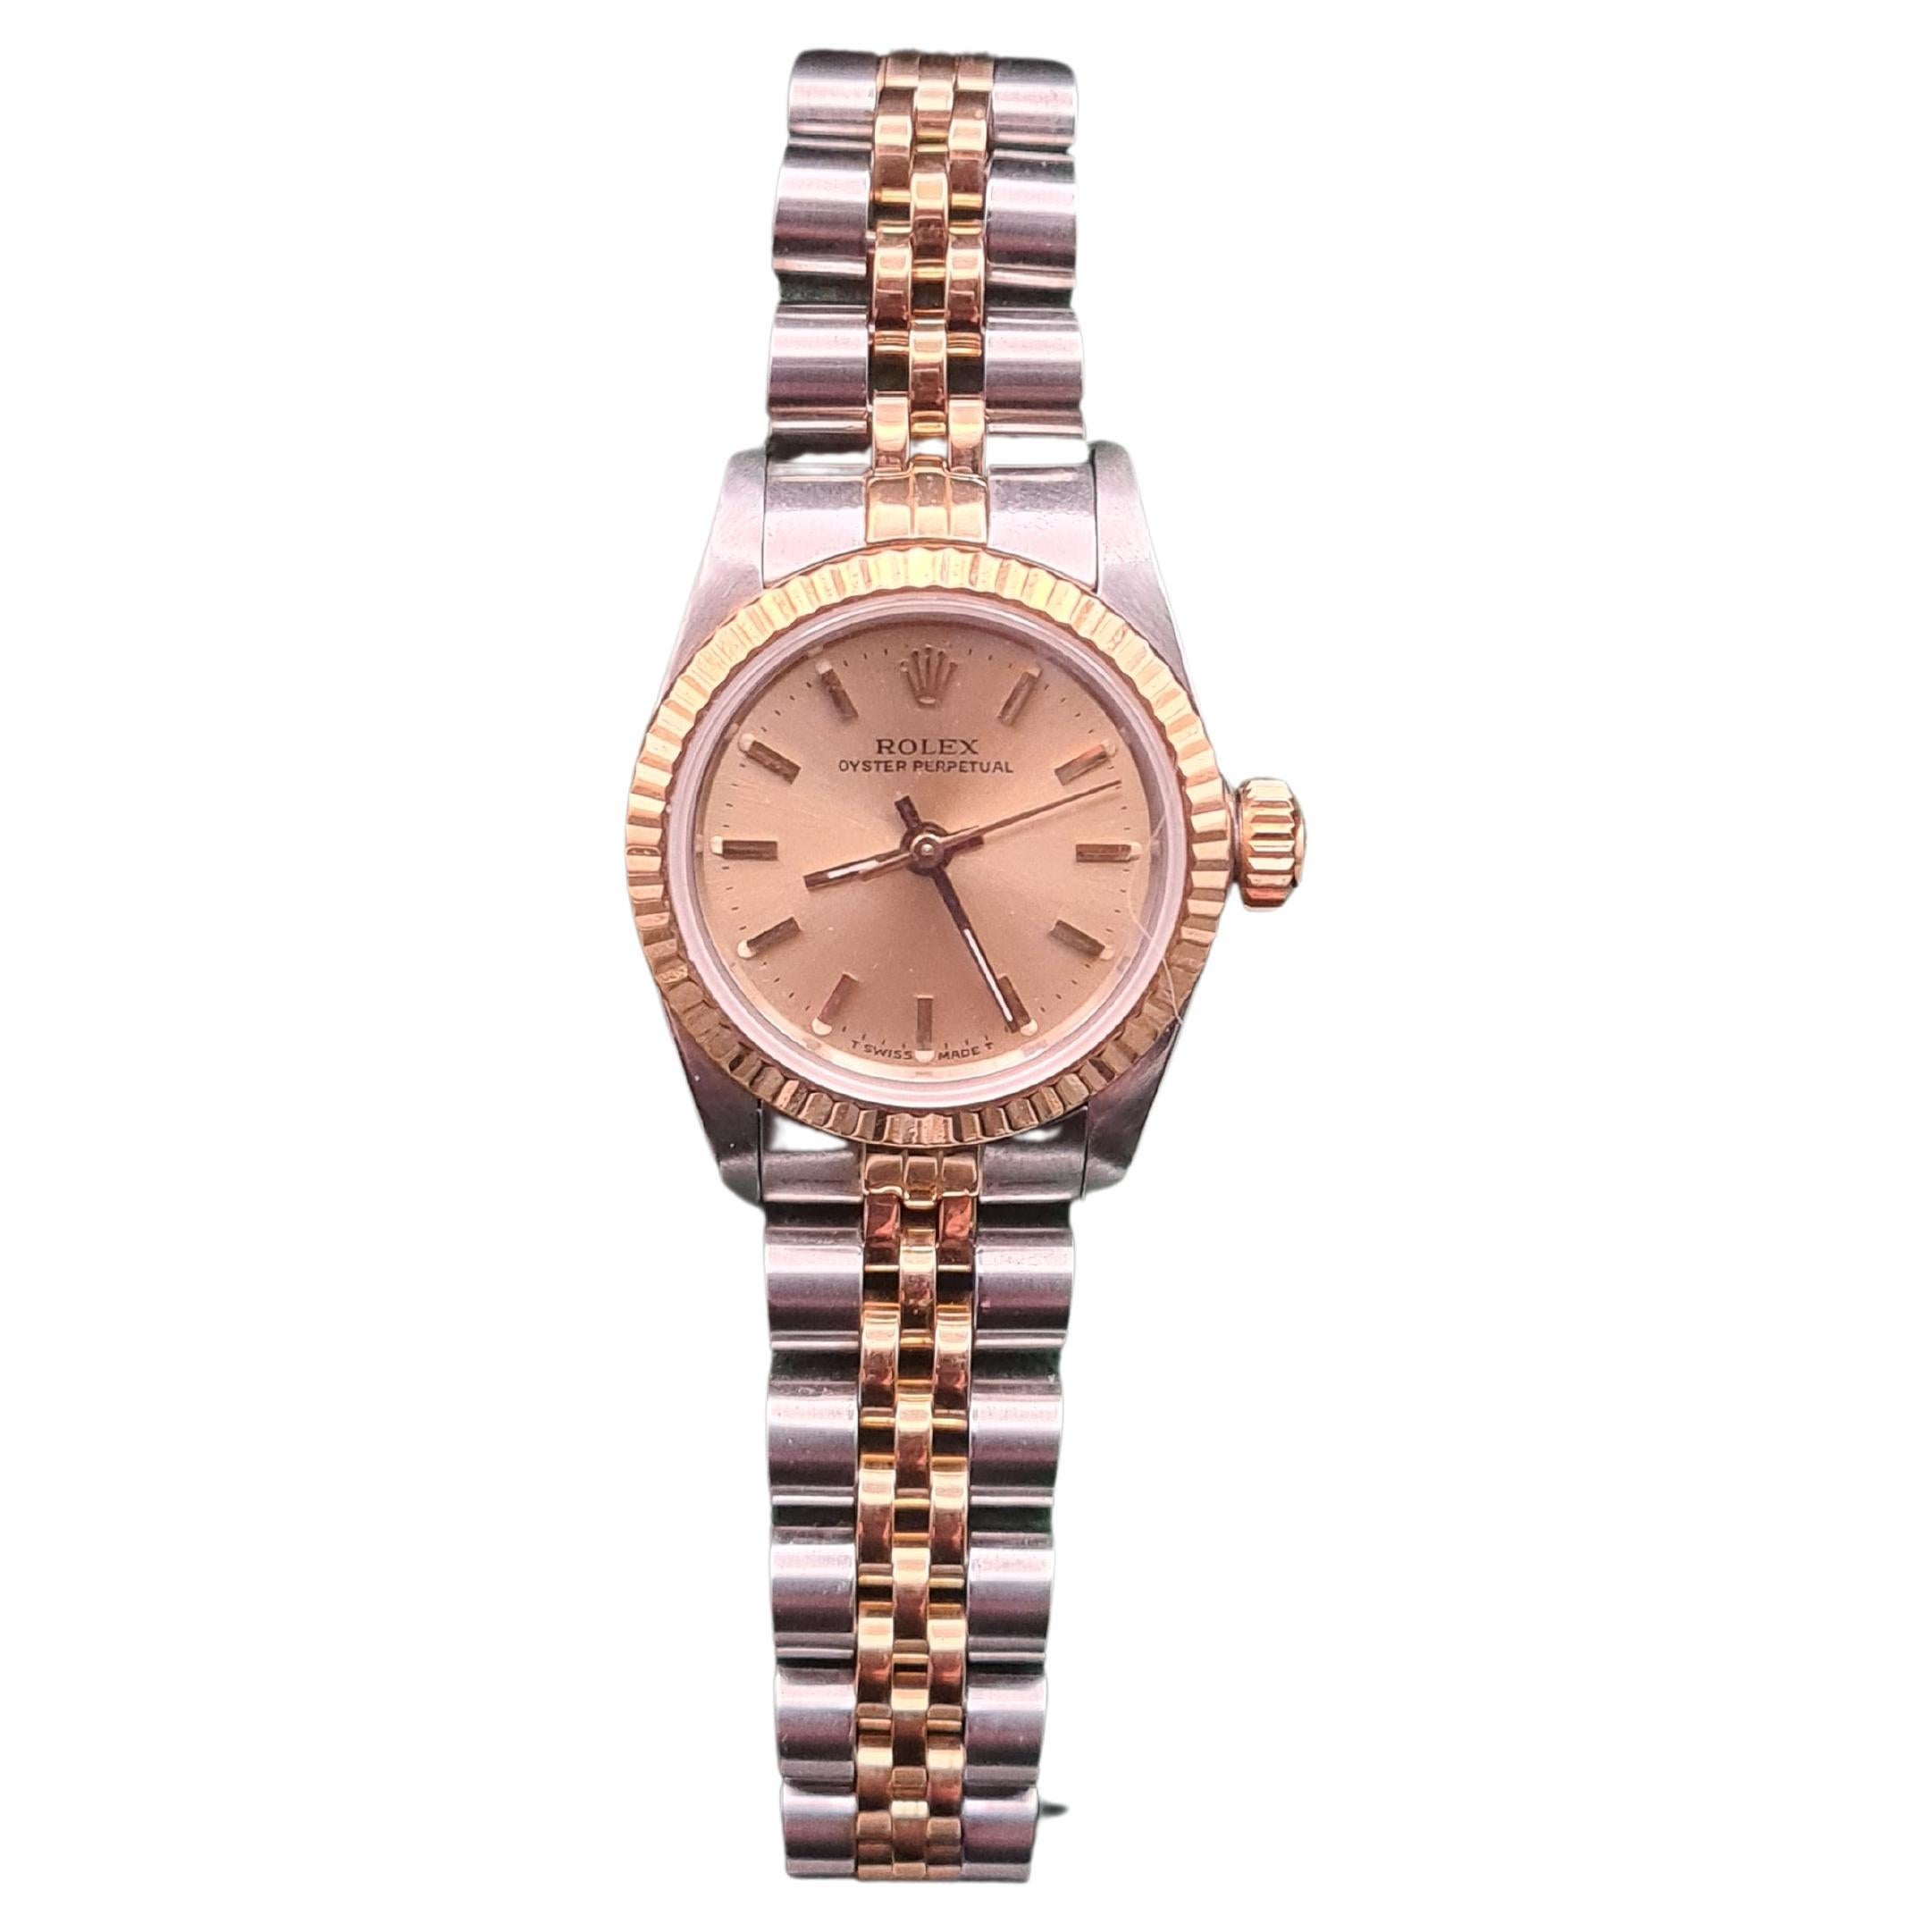 Beautiful Vintage Woman's Rolex Oyster Perpetual For Sale